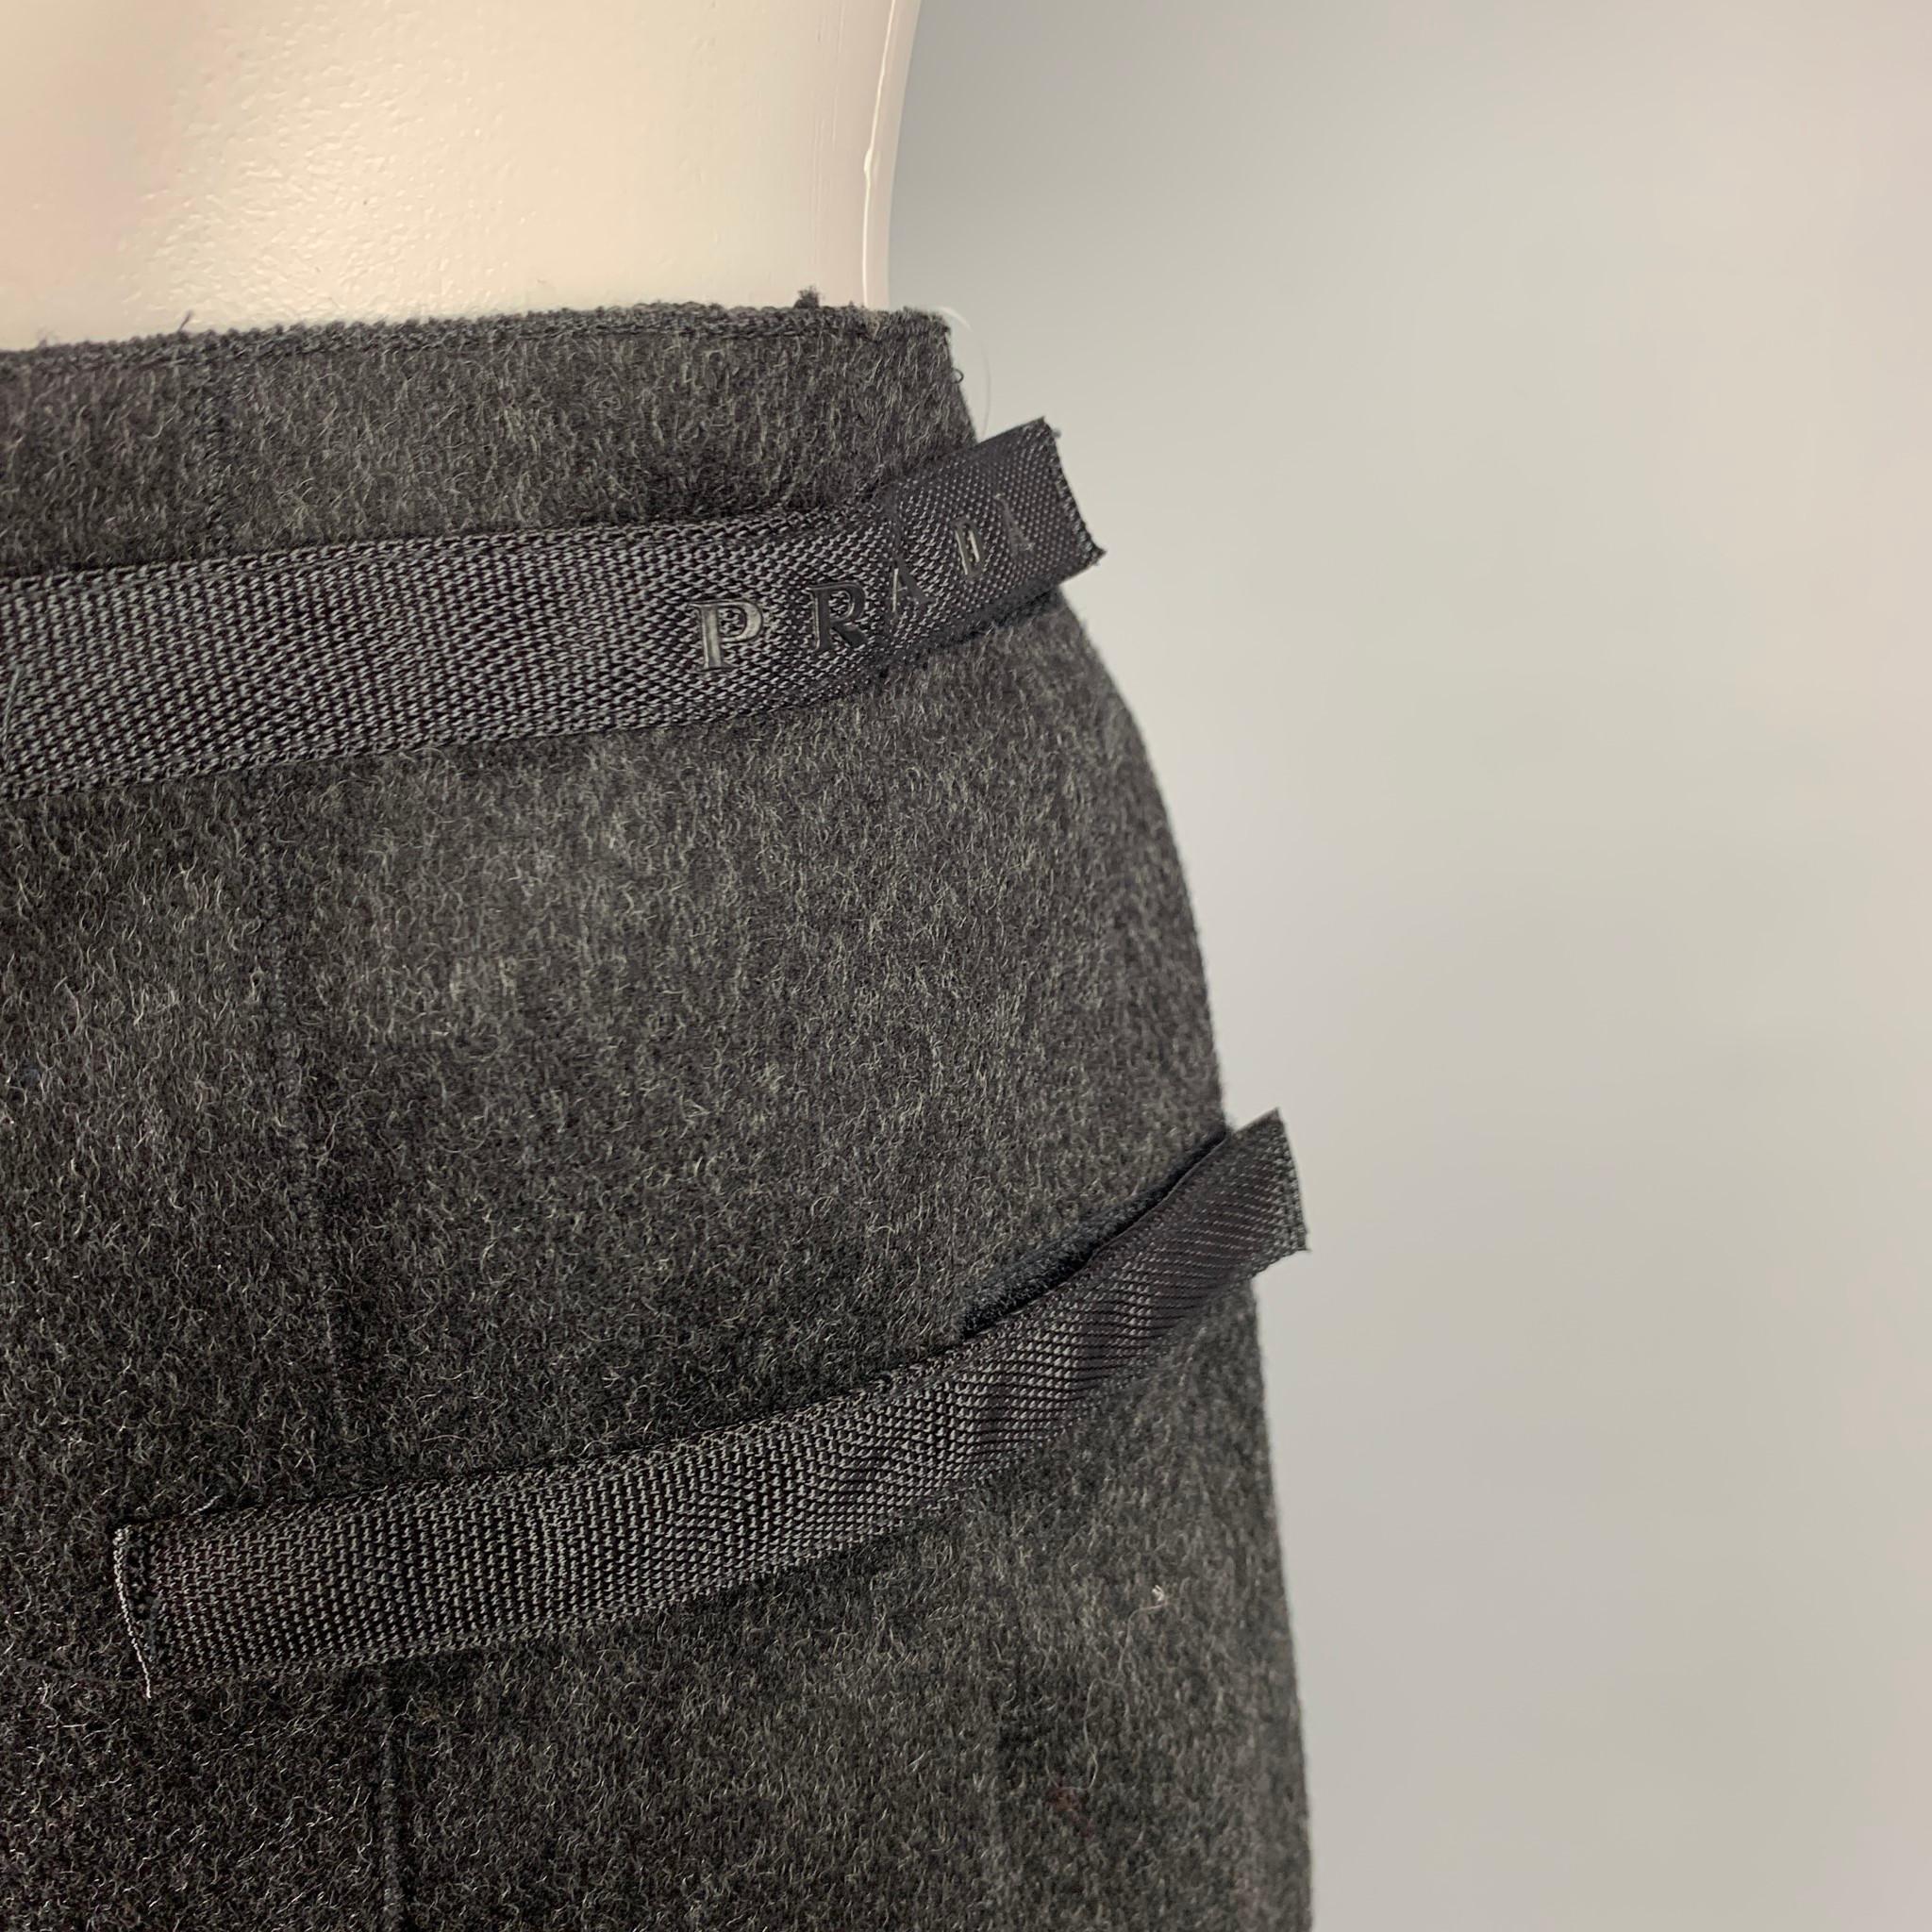 PRADA mini skirt comes in a charcoal virgin wool with a patent leather trim featuring a wrap style, pleated, hook & loop detail, and a snap button closure. Made in Italy. 

Very Good Pre-Owned Condition.
Marked: 38

Measurements:

Waist: 29 in.
Hip: